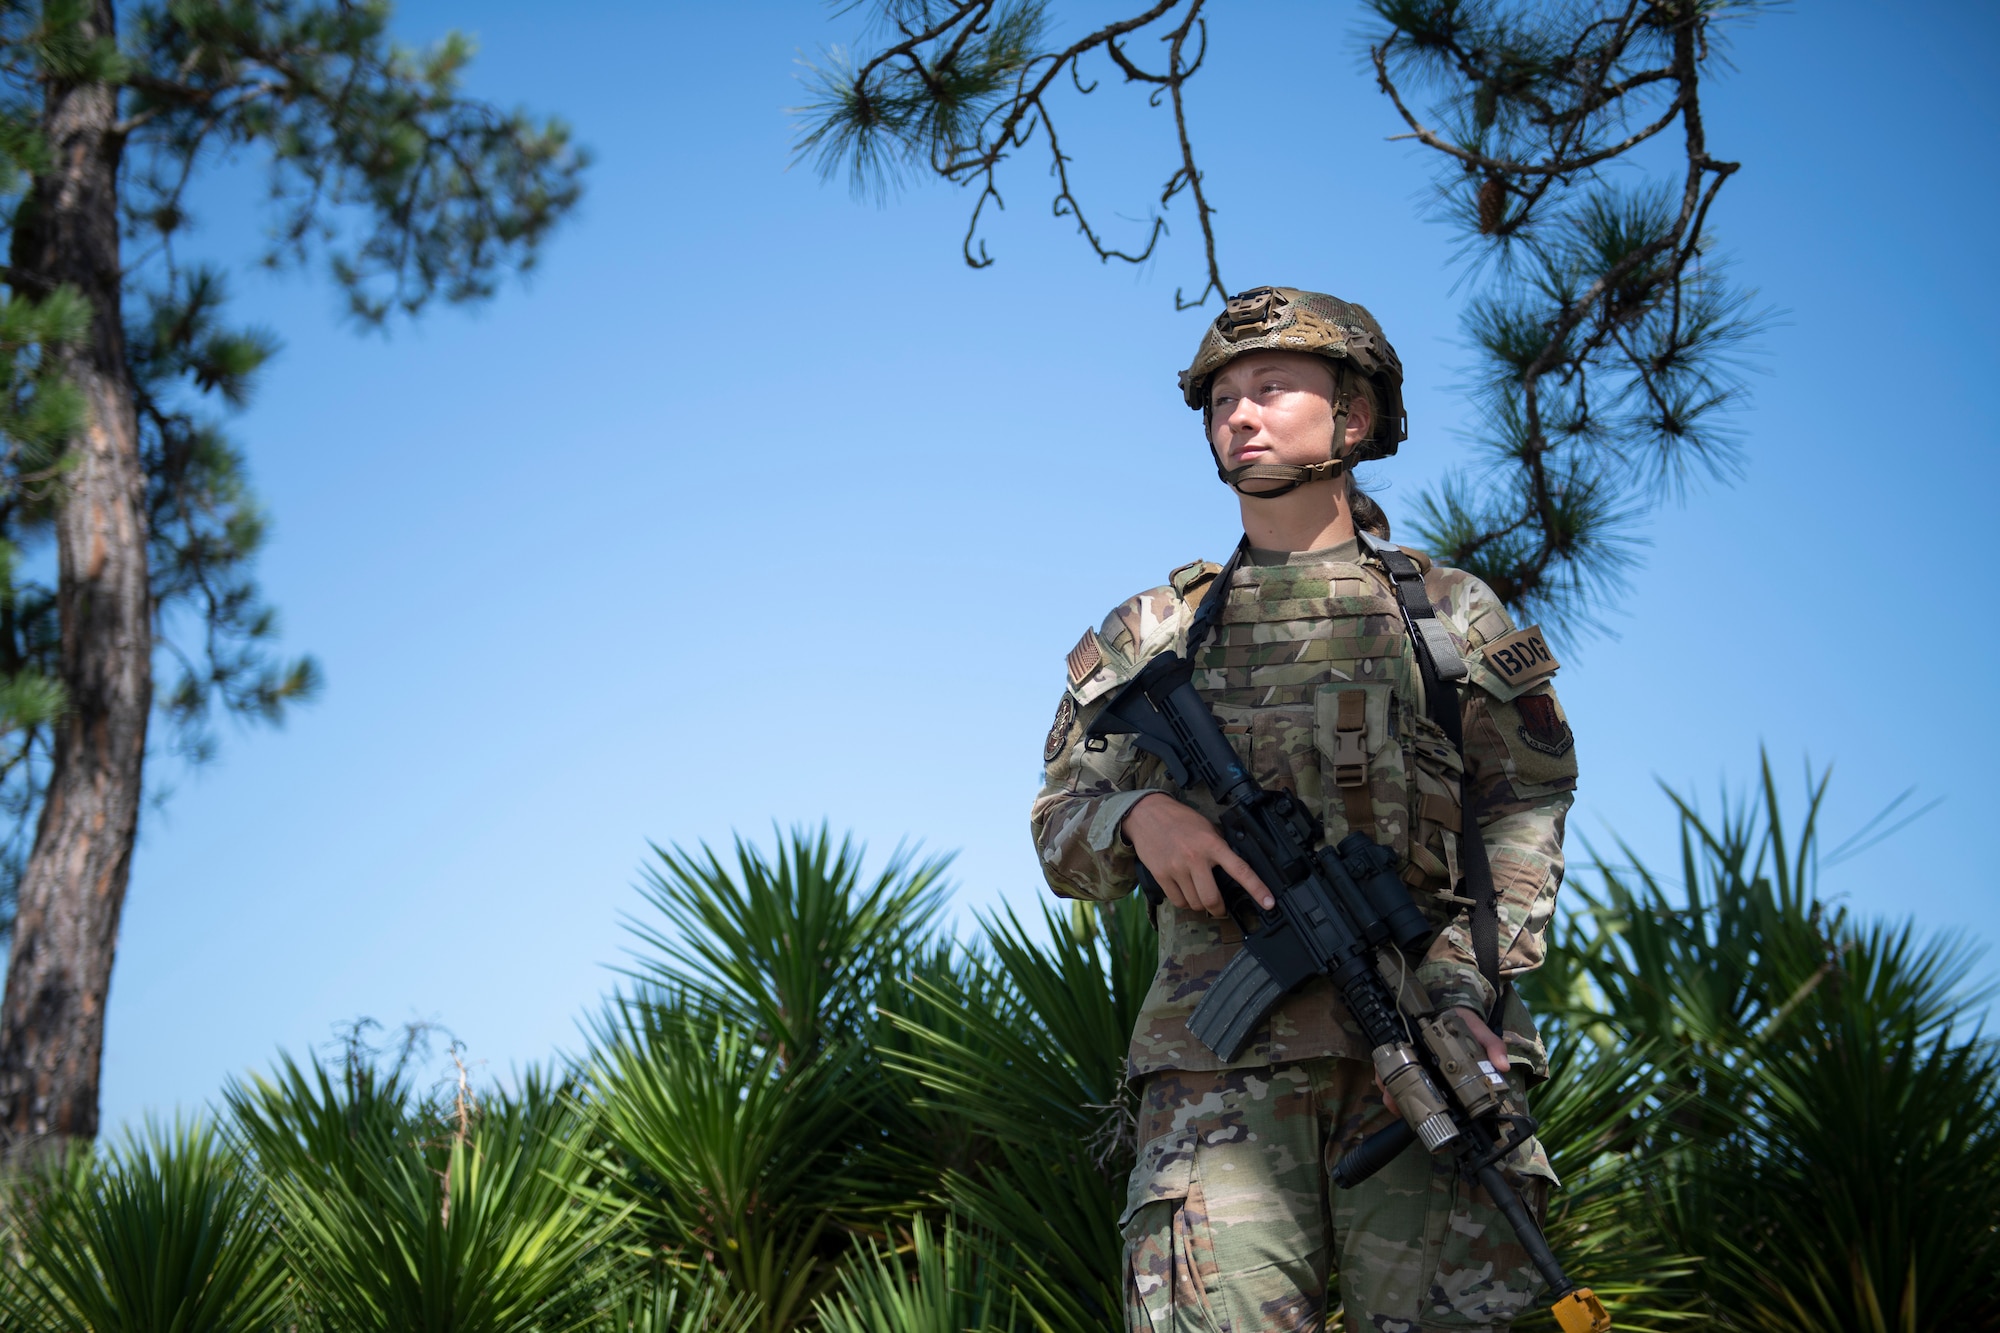 A photo of an Airman standing with her M-4 Carbine pointed towards the ground, green sprouting palm trees casting behind her on the ground with a bright blue sky.